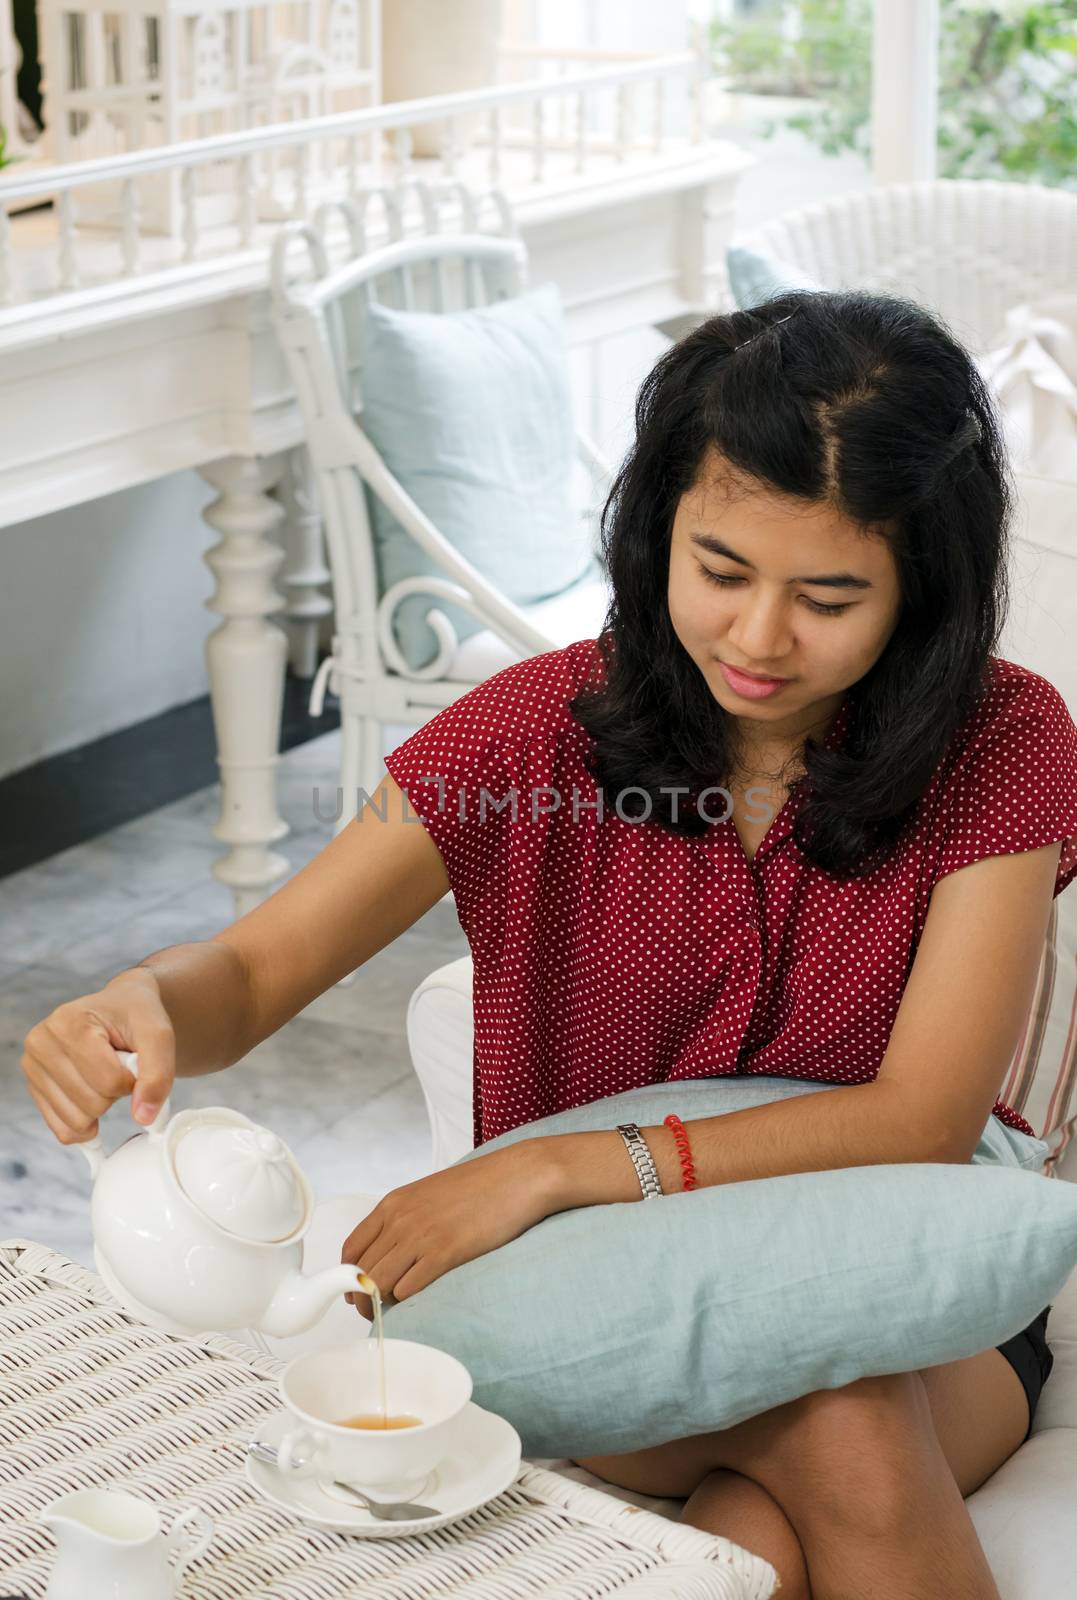 Woman pouring tea from the teapot into a white ceramic cup by siraanamwong